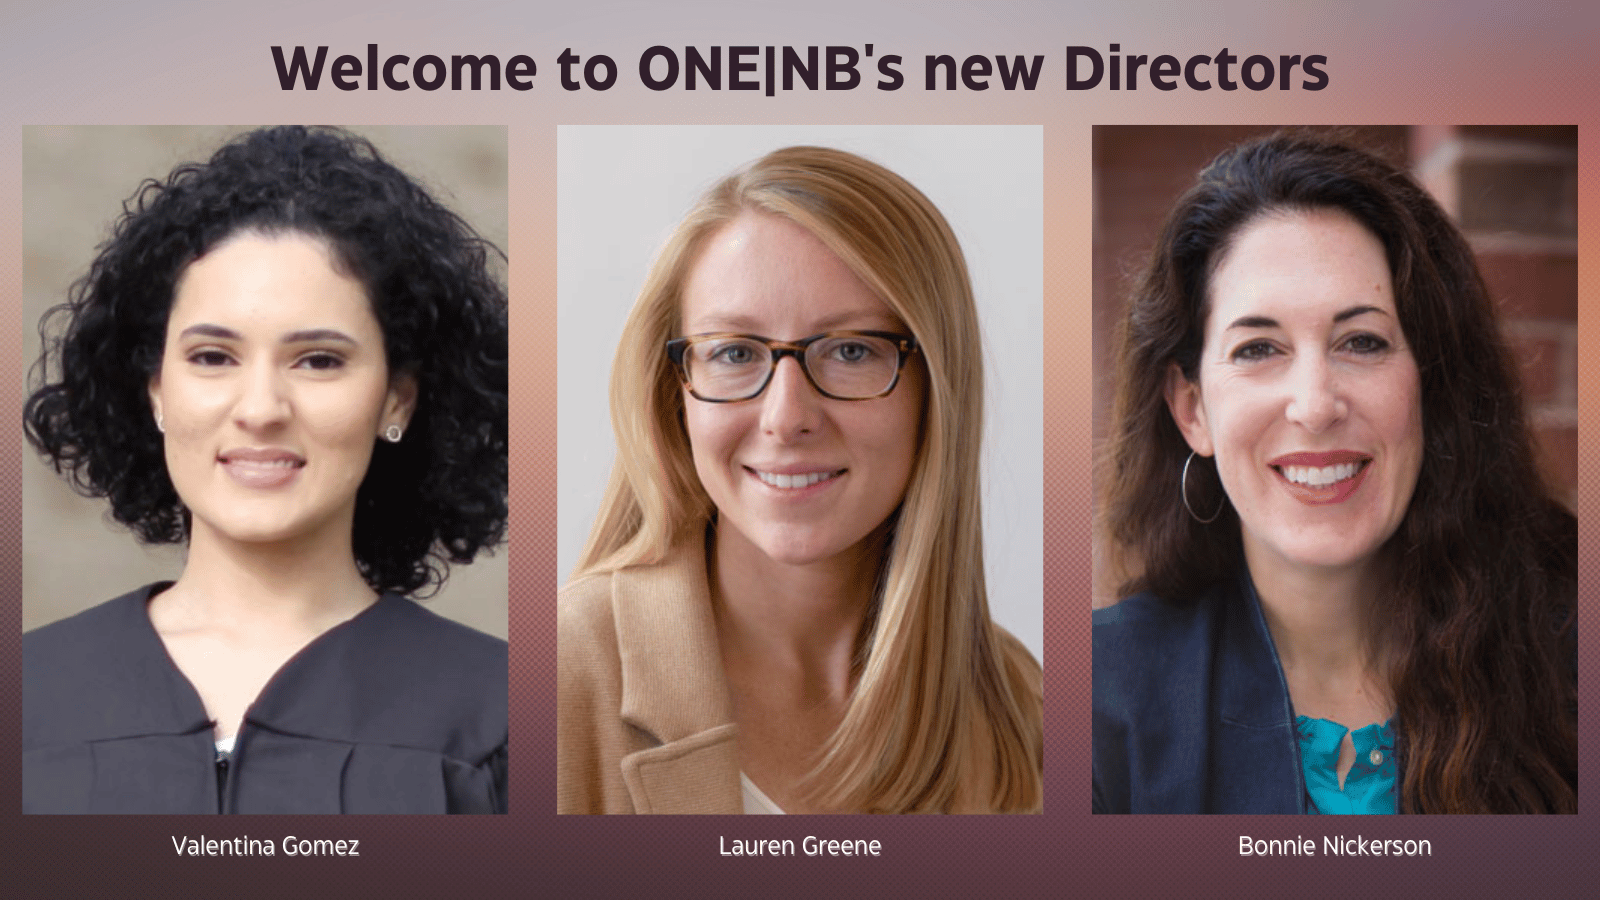 An image of ONE|NB's newest directors: Valentina Gomez, Lauren Greene, and Bonnie Nickerson